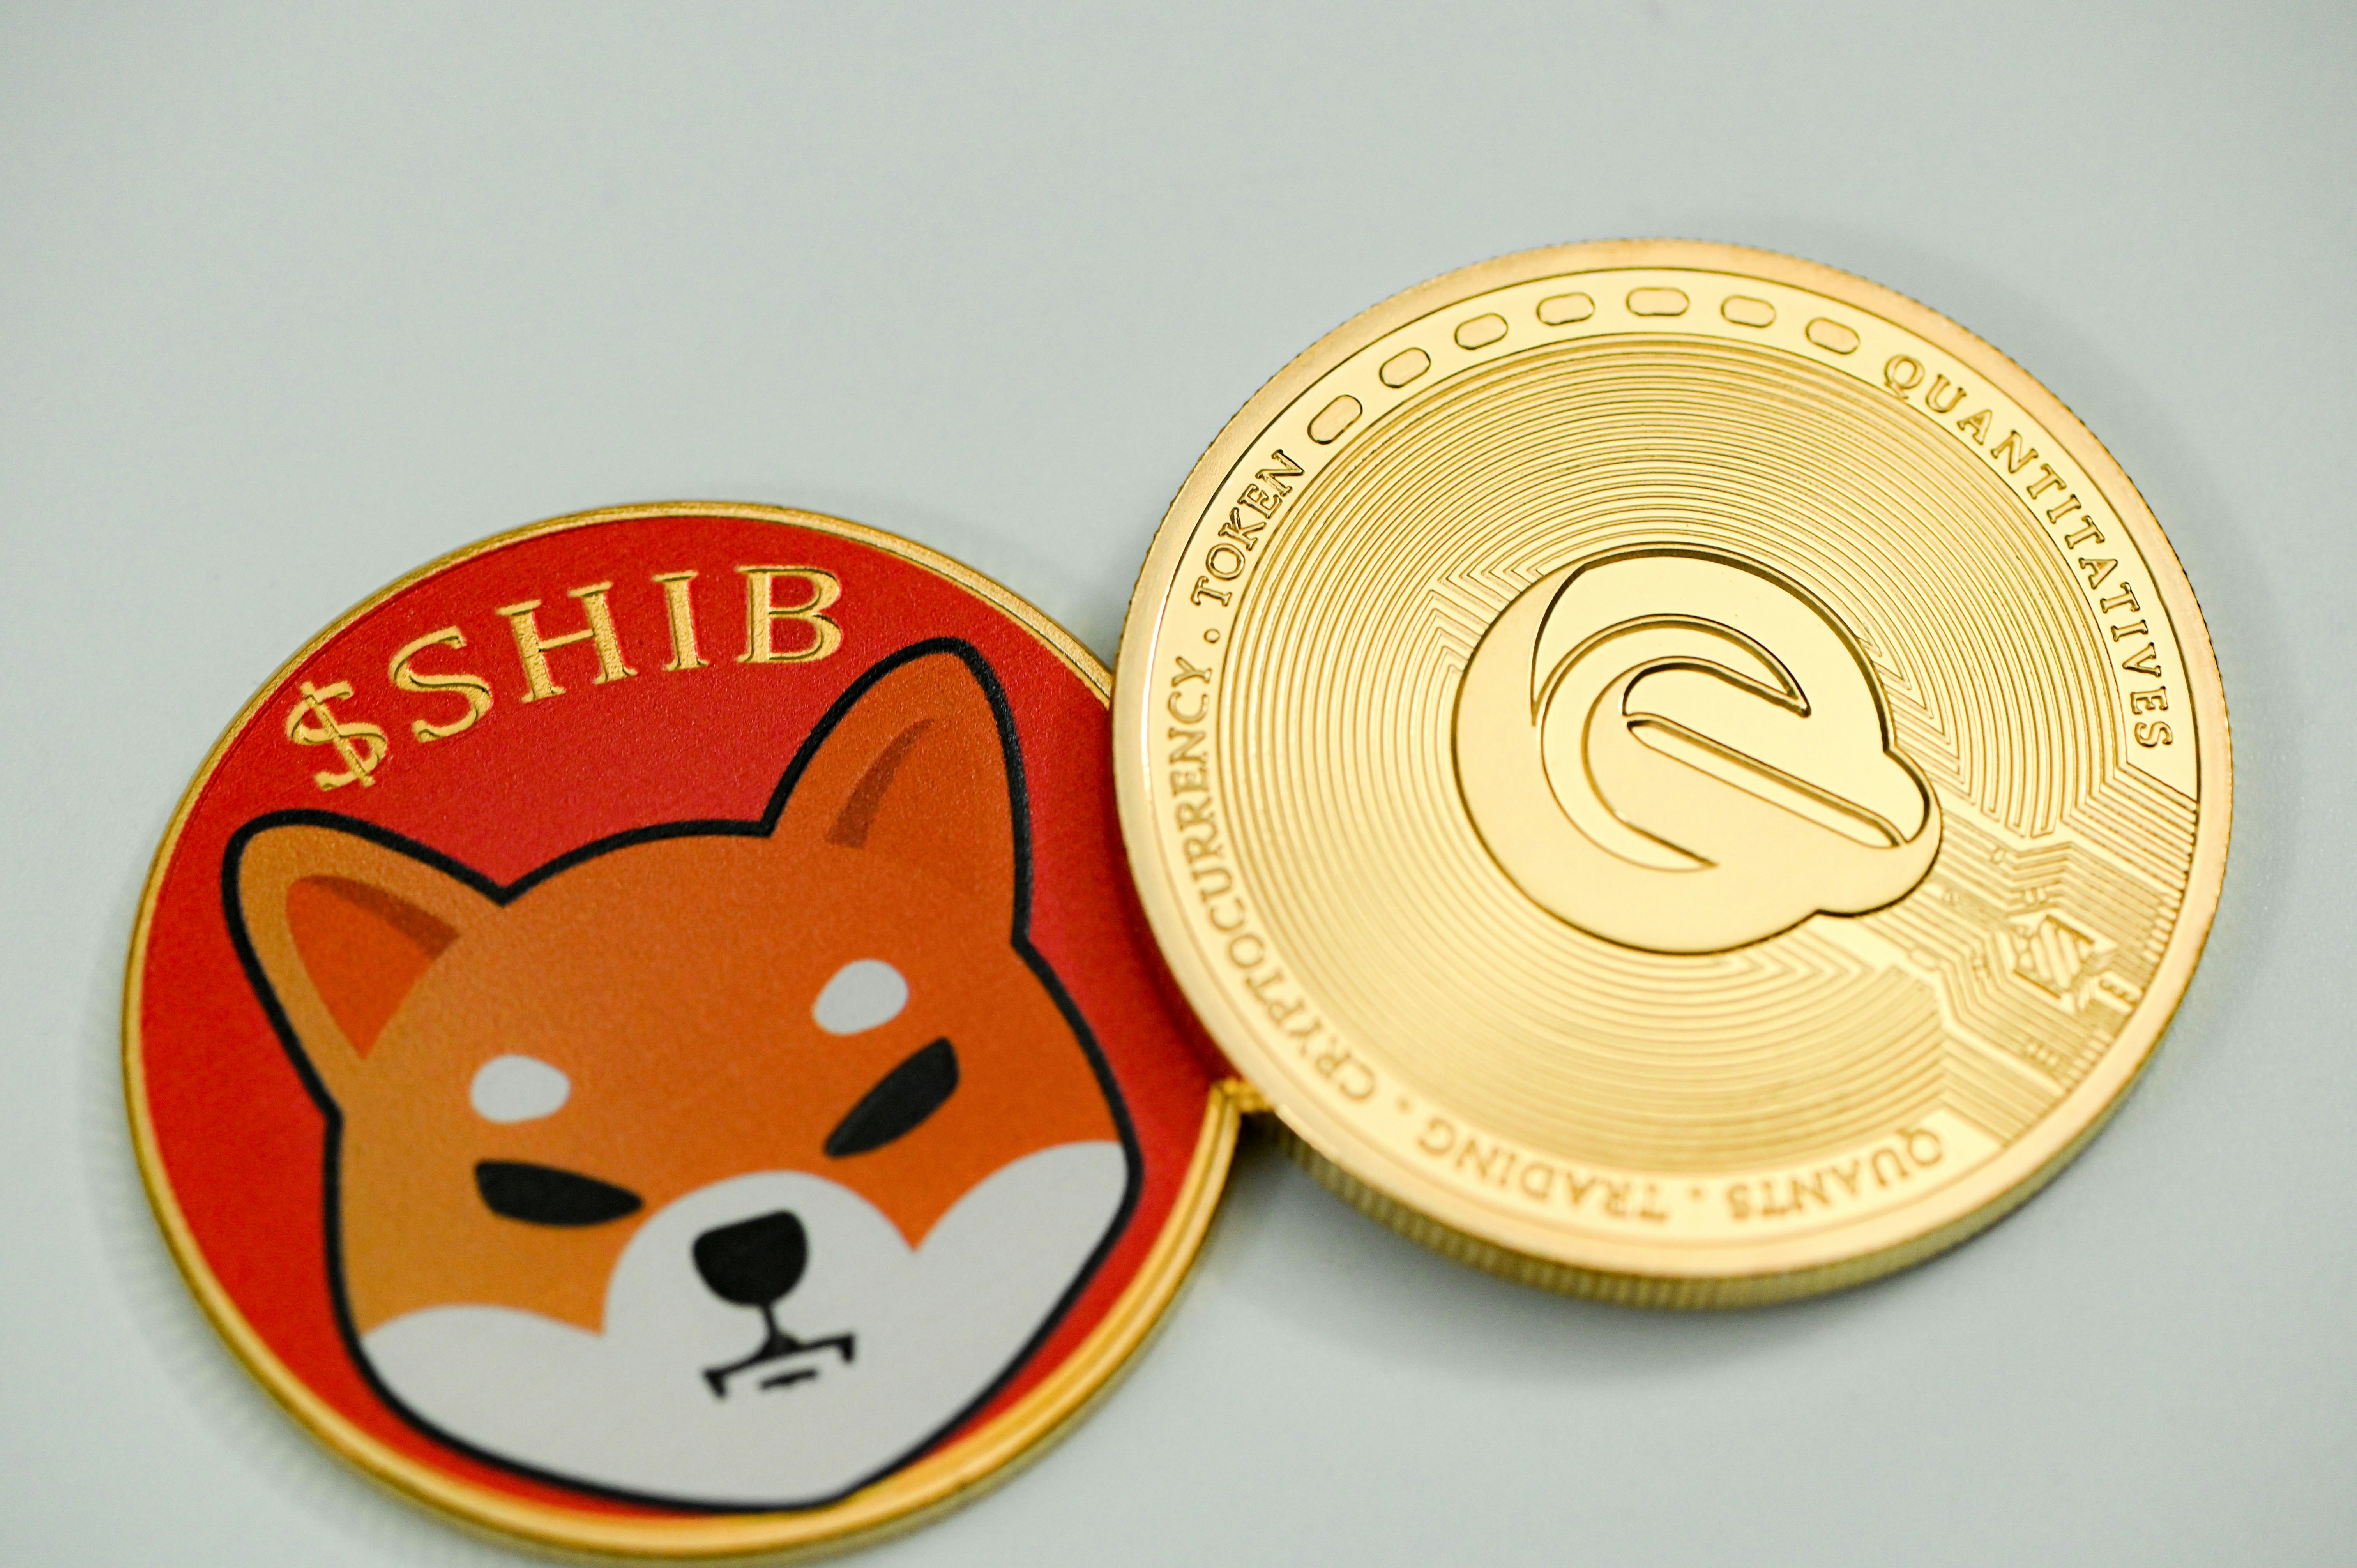 SHIB coin and QEST coin placed on a white background